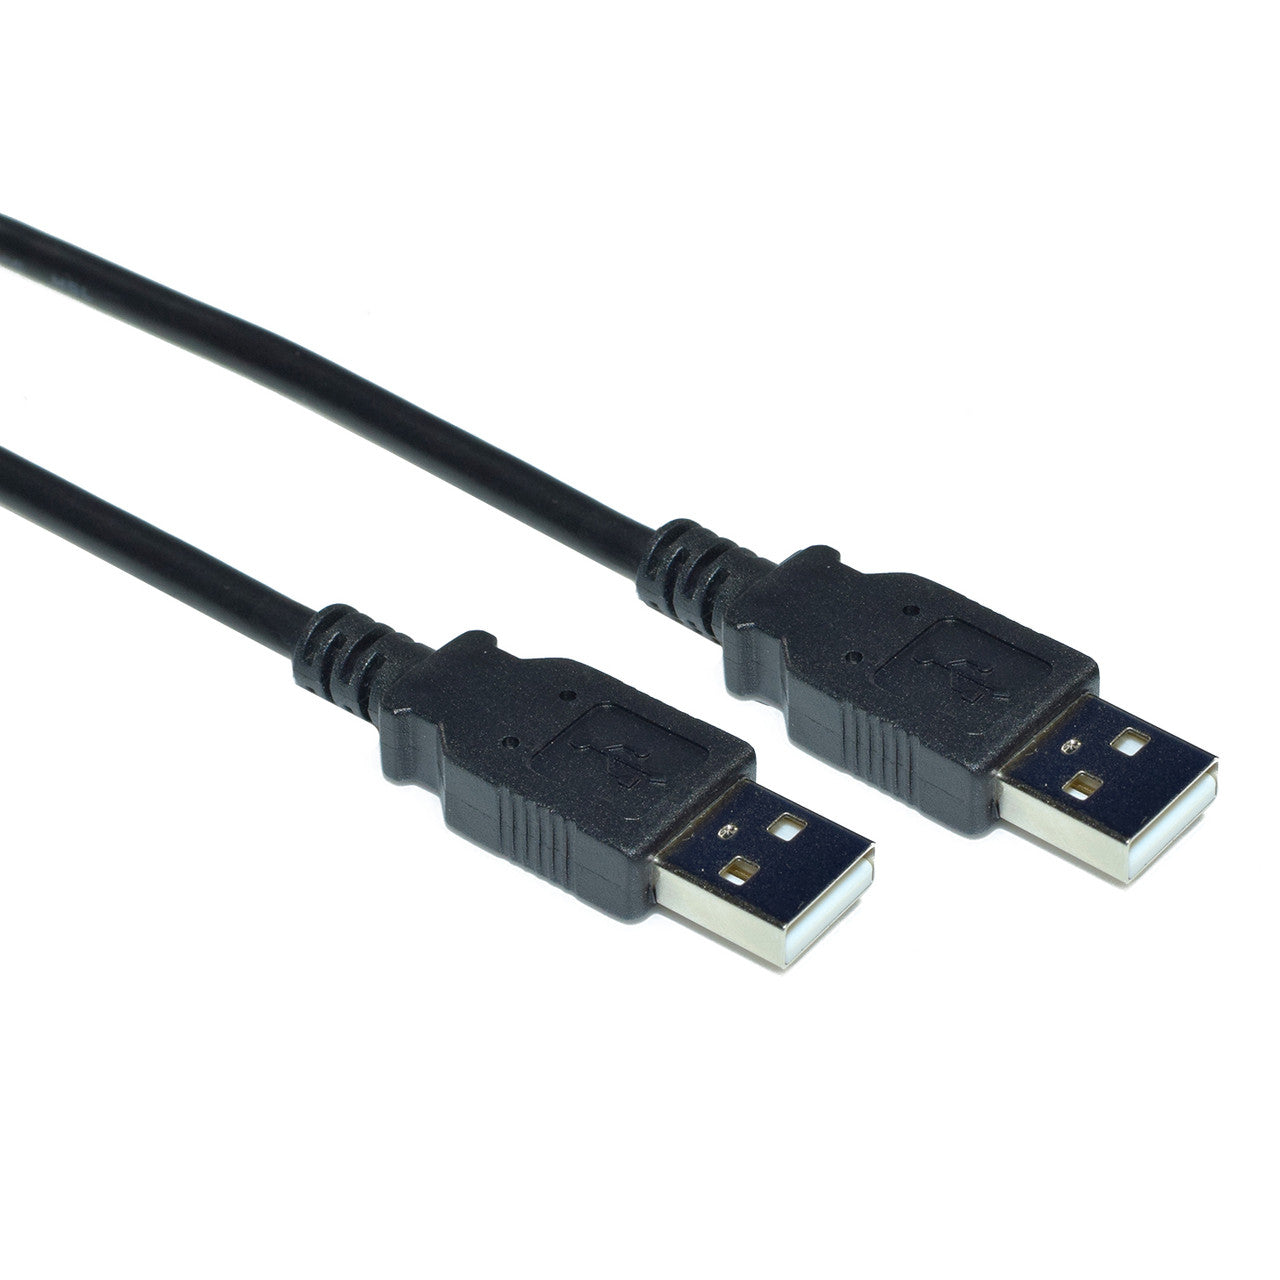 6FT USB 3.0 A Male to A Male Cable